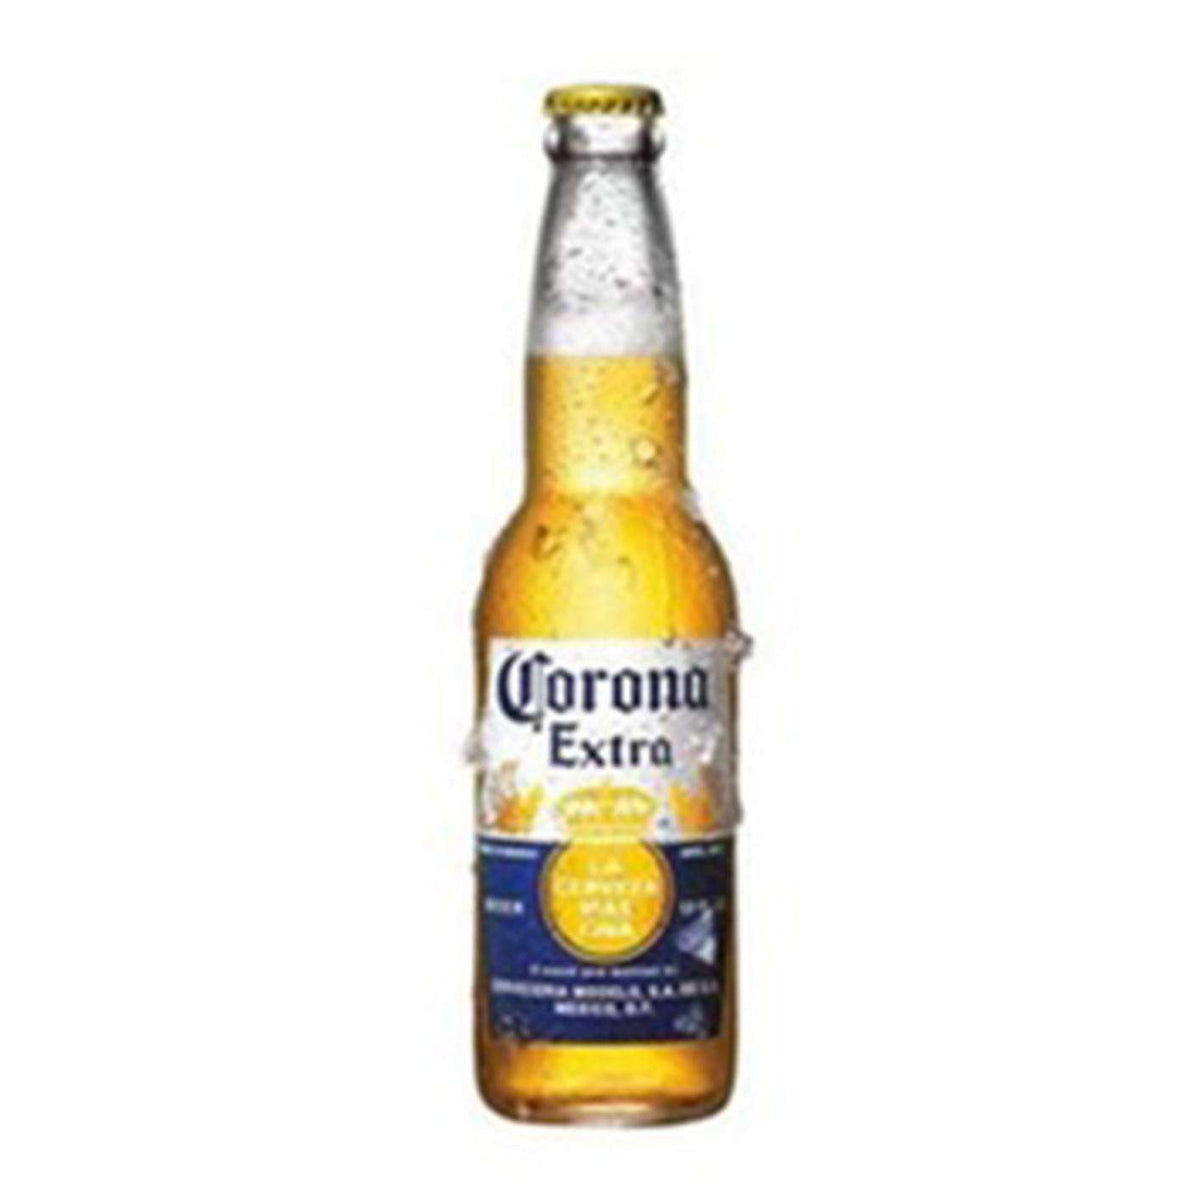 Corona Bottled Beer Delivery Service :: Corona Beer Delivery London